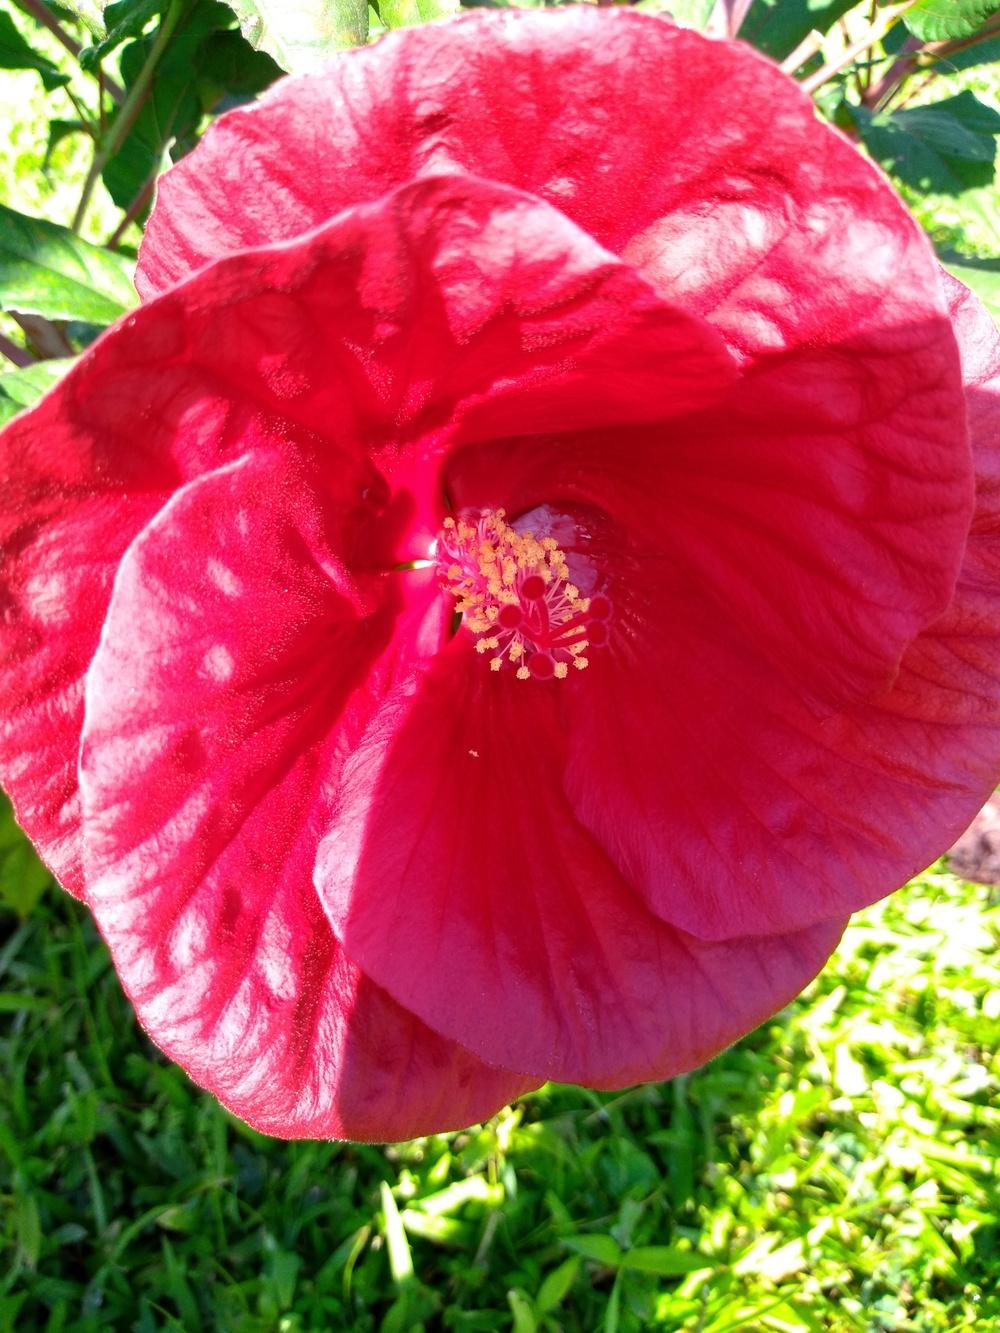 Photo of Hibiscus uploaded by hiyall